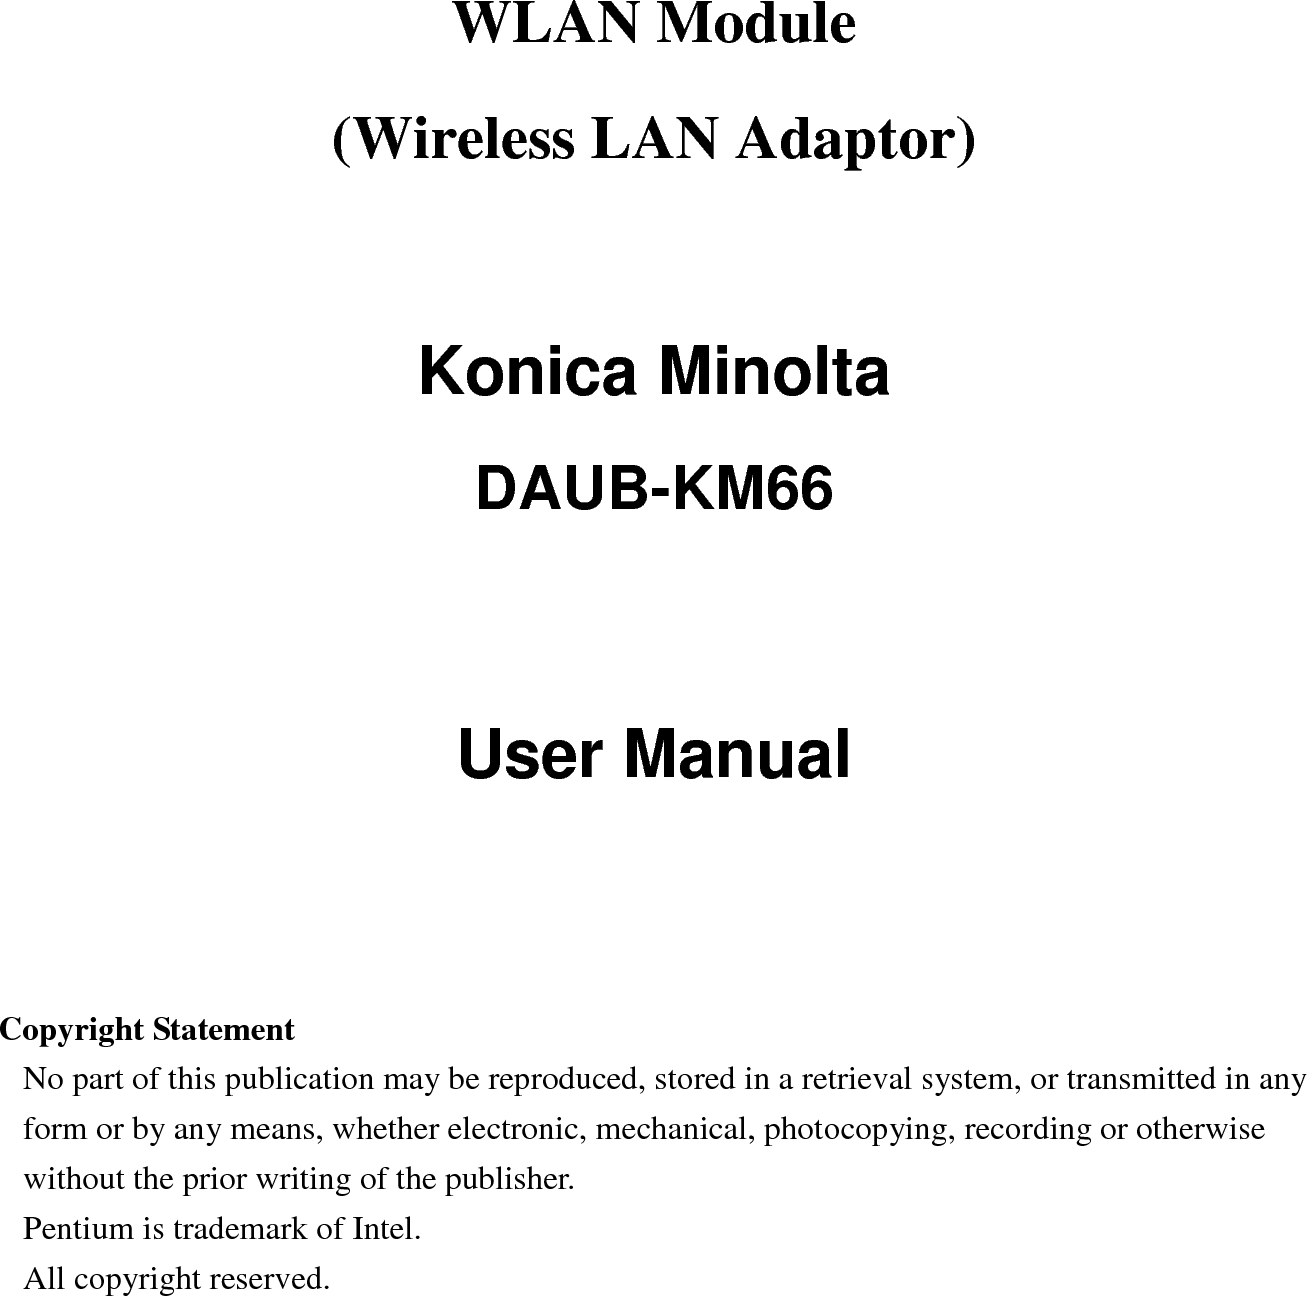 WLAN Module (Wireless LAN Adaptor)    Konica Minolta   DAUB-KM66   User Manual     Copyright Statement No part of this publication may be reproduced, stored in a retrieval system, or transmitted in any form or by any means, whether electronic, mechanical, photocopying, recording or otherwise without the prior writing of the publisher. Pentium is trademark of Intel.   All copyright reserved.   